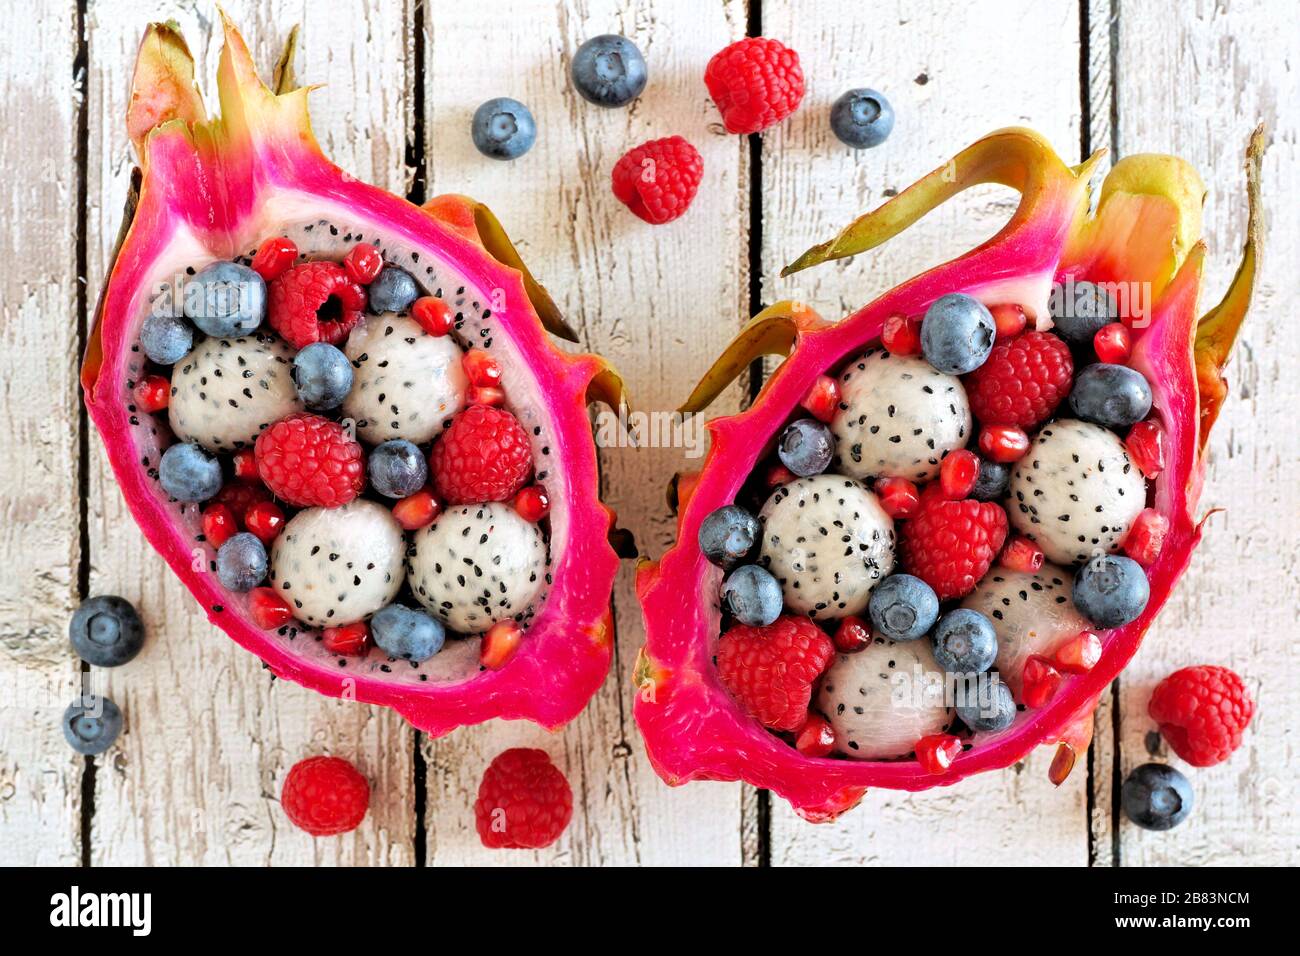 Colorful dragon fruit salads with raspberries and blueberries over a white wood background Stock Photo